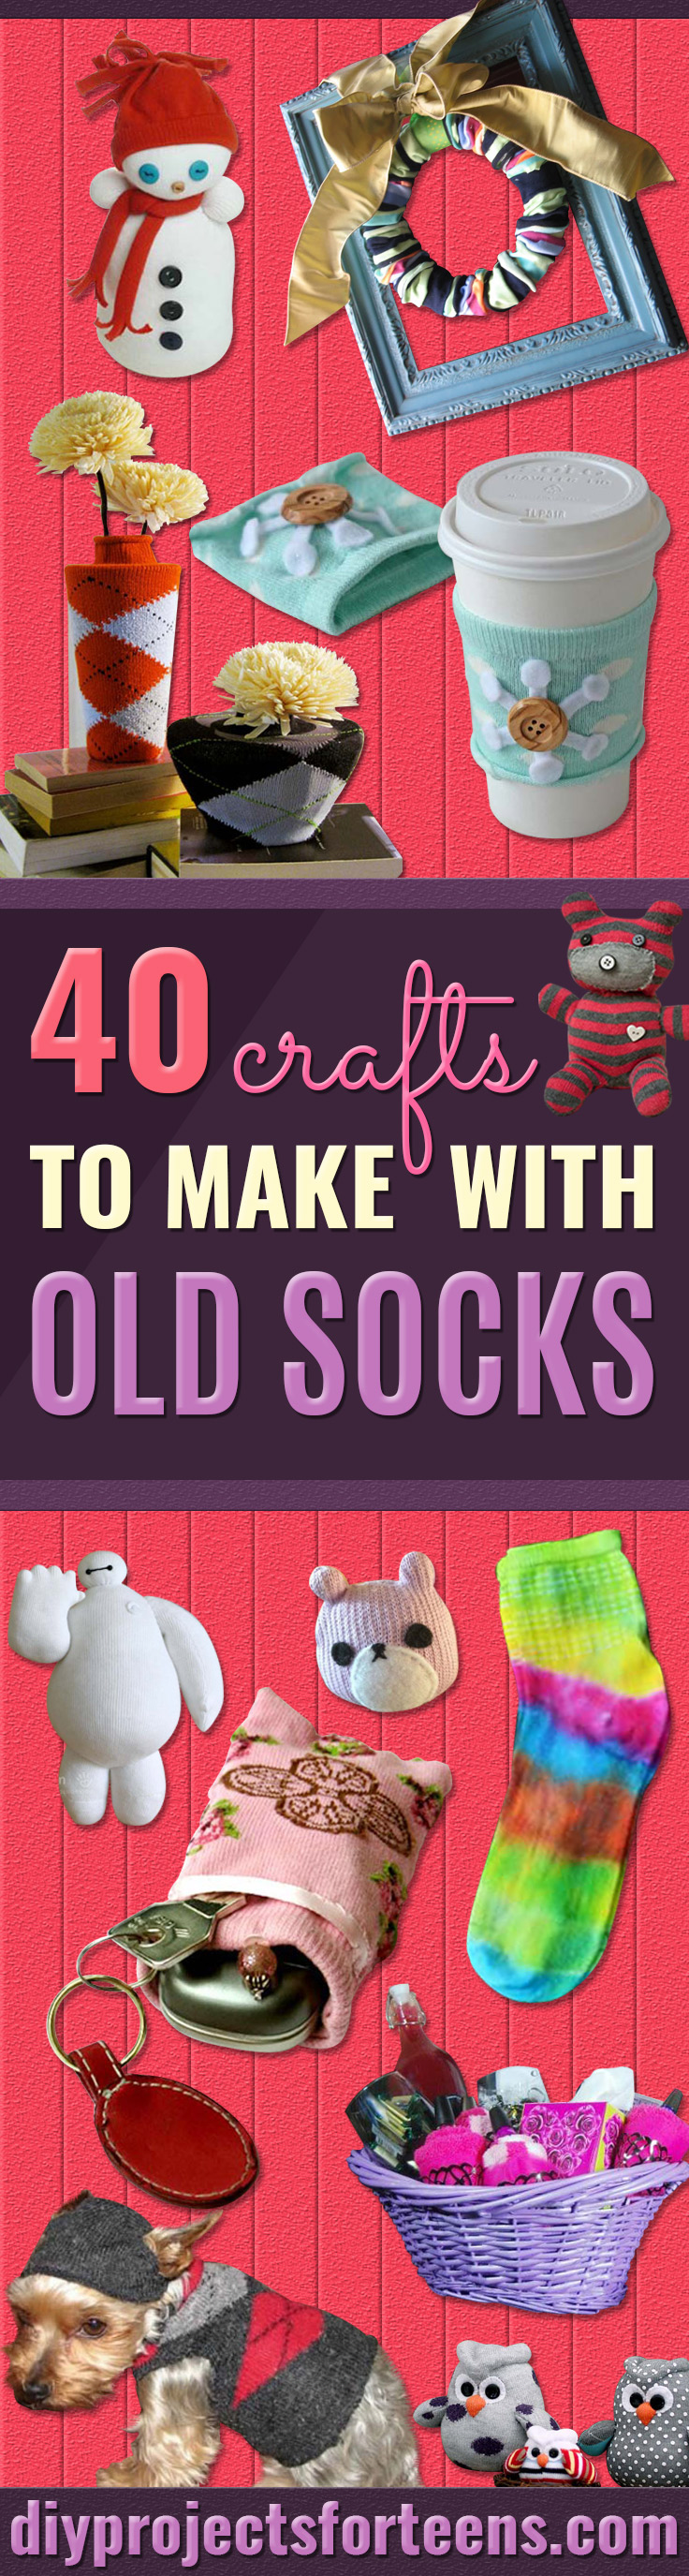 40 Creative Crafts to Make With Old Socks